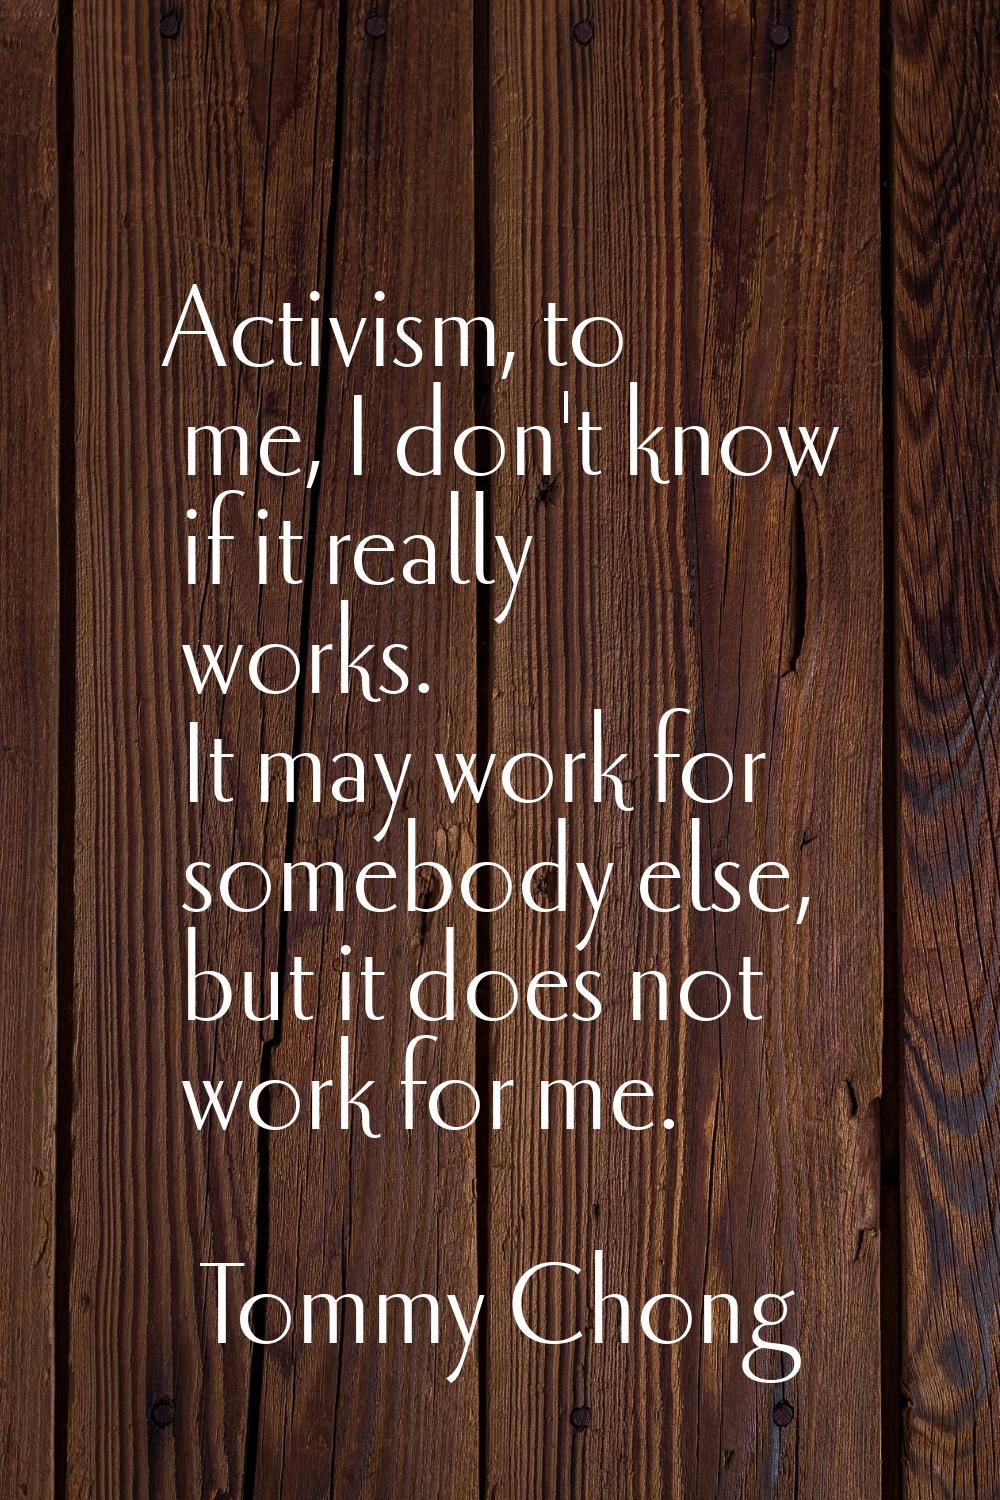 Activism, to me, I don't know if it really works. It may work for somebody else, but it does not wo